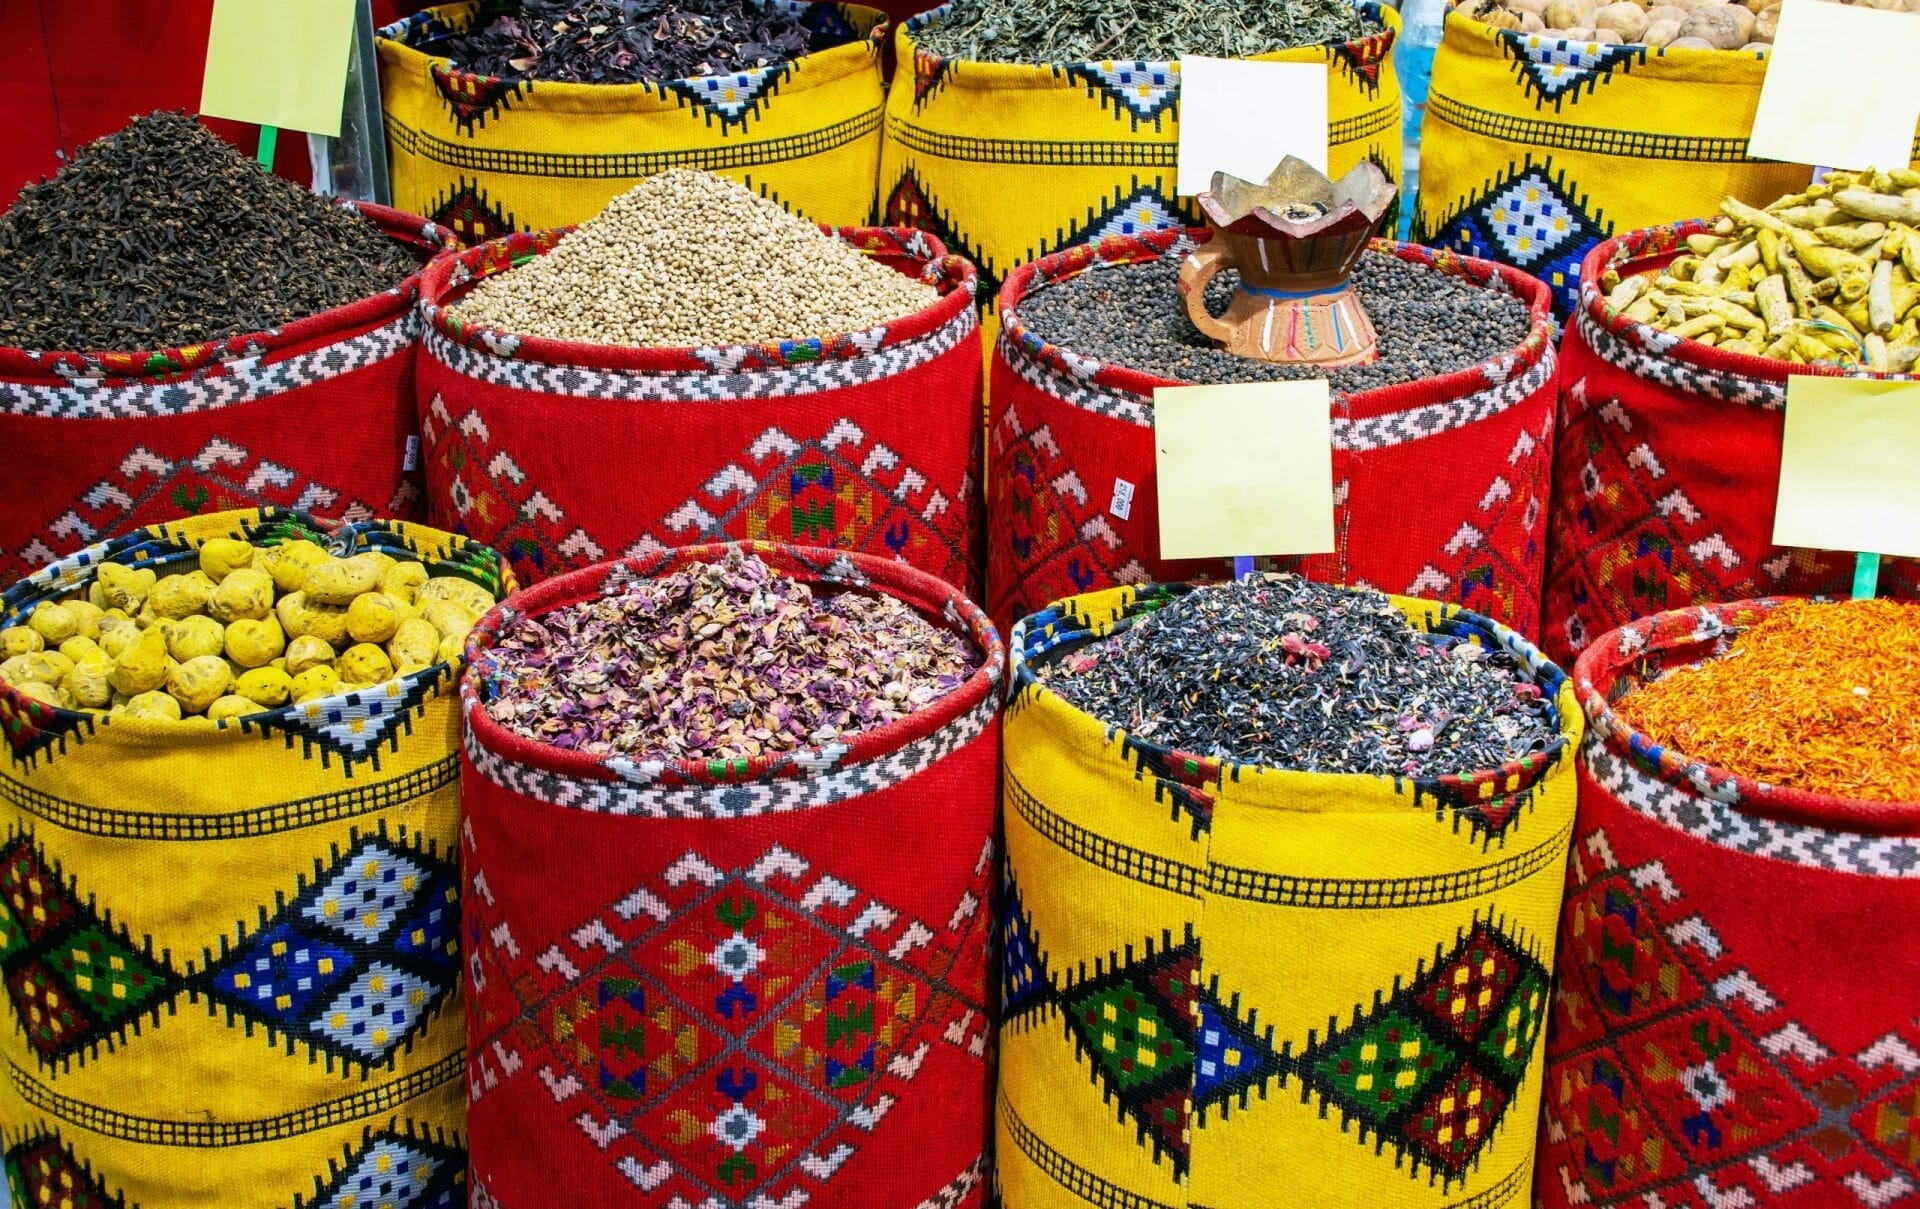 Oriental bazaar with spices, Mutrah old town, Muscat, Oman